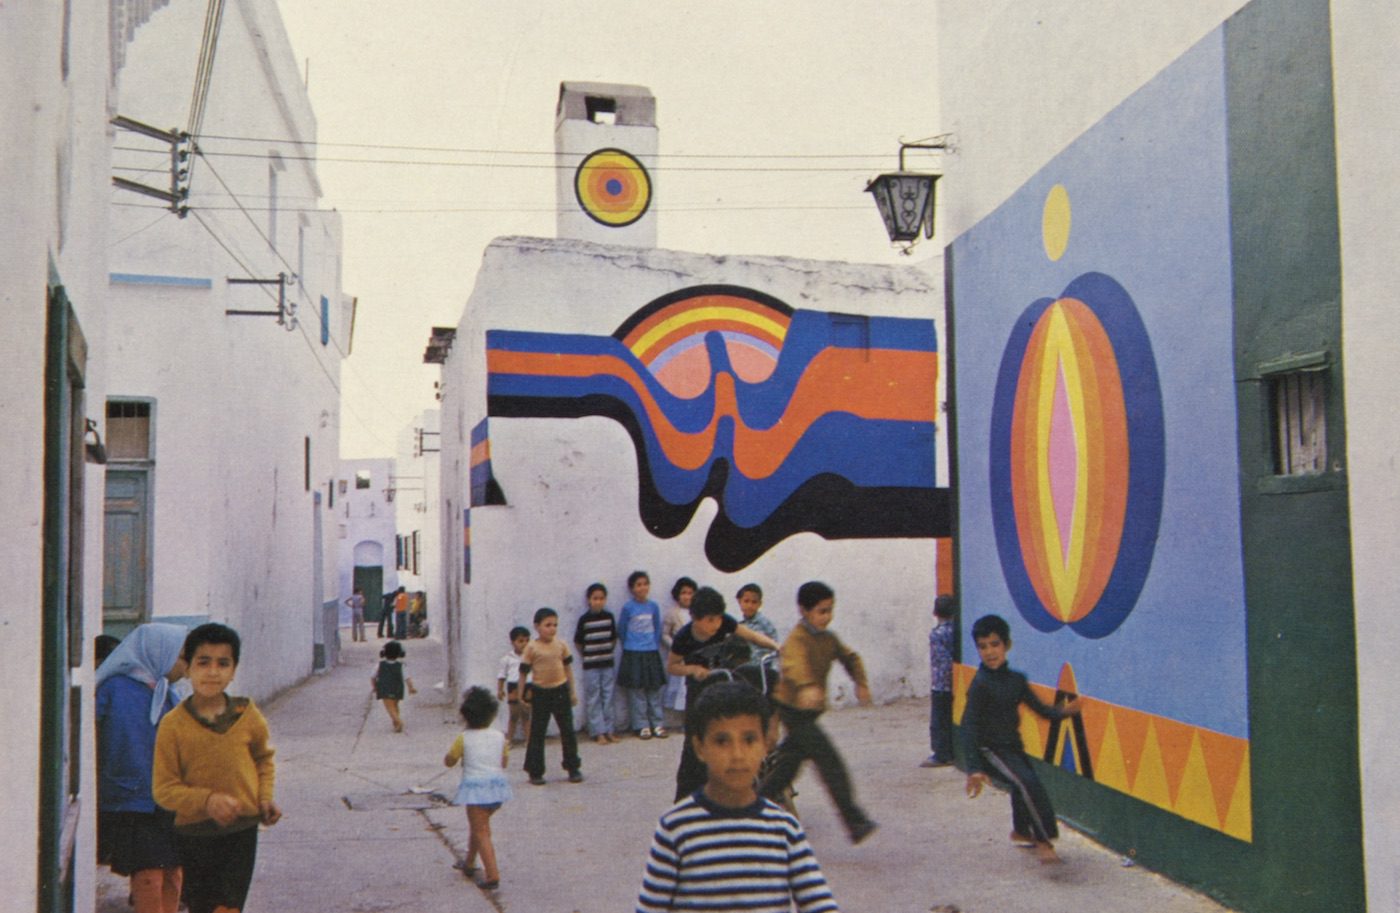 Mural paintings by Farid Belkahia (center) and Mohammed Hamidi (right), Asilah, Morocco. Both 1978. As published in Asilah: Premier moussem culturel, juillet/août 1978, exh. cat. (Casablanca: Shoof, 1978). Reproduced by permission of the photographer, Mohammed Melehi.